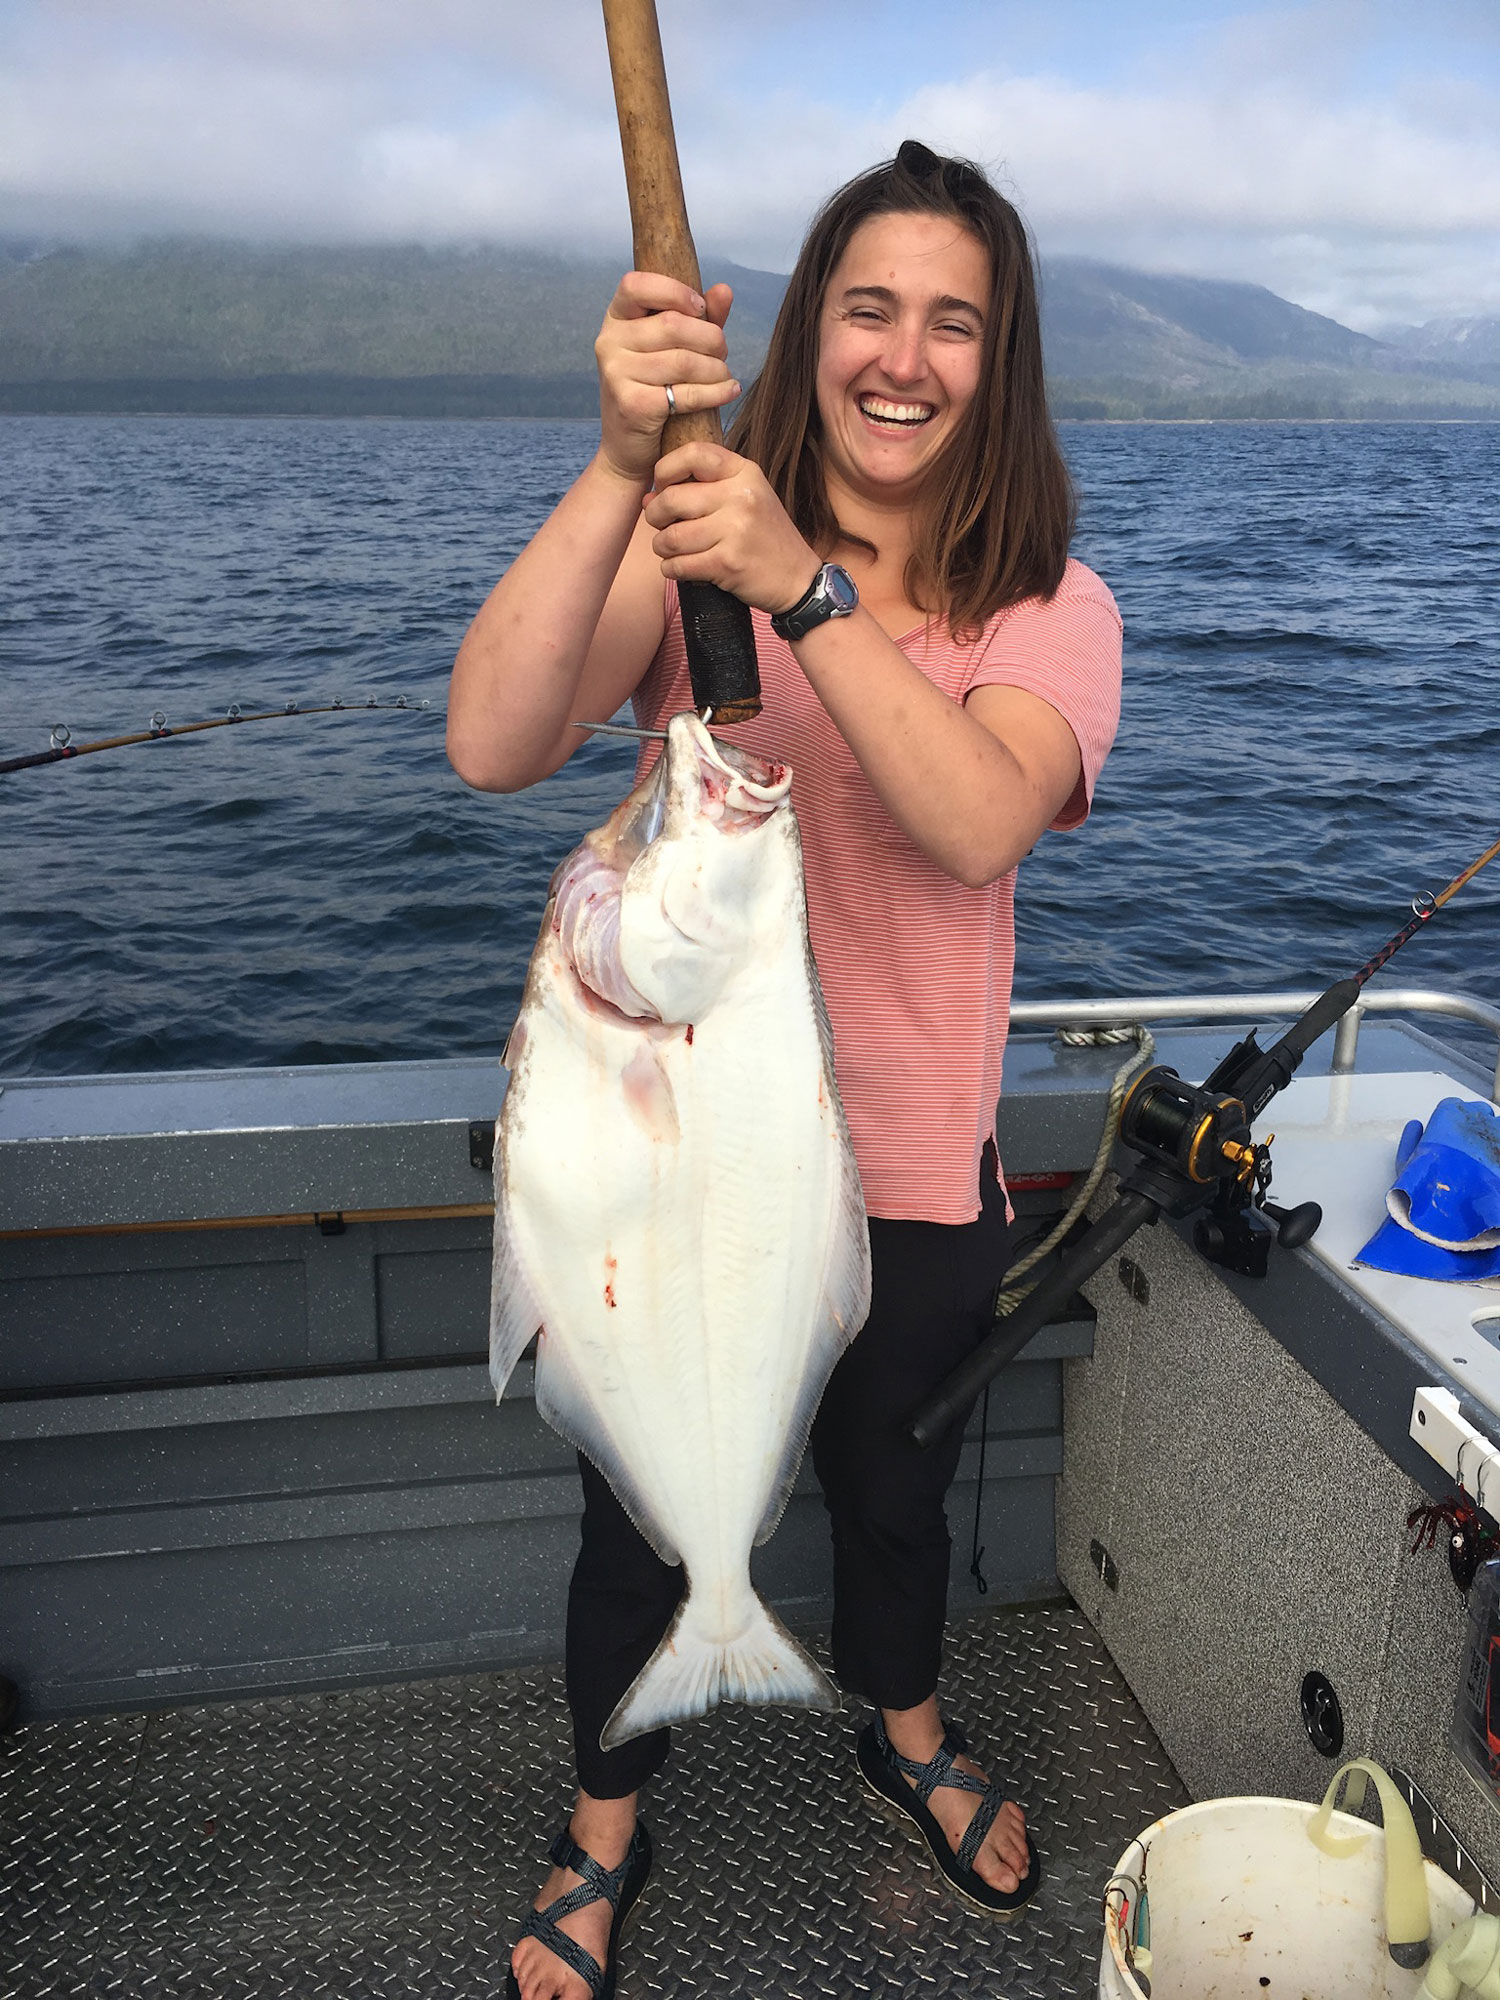 A woman holding a large fish caught on the Ketchikan fishing trip.